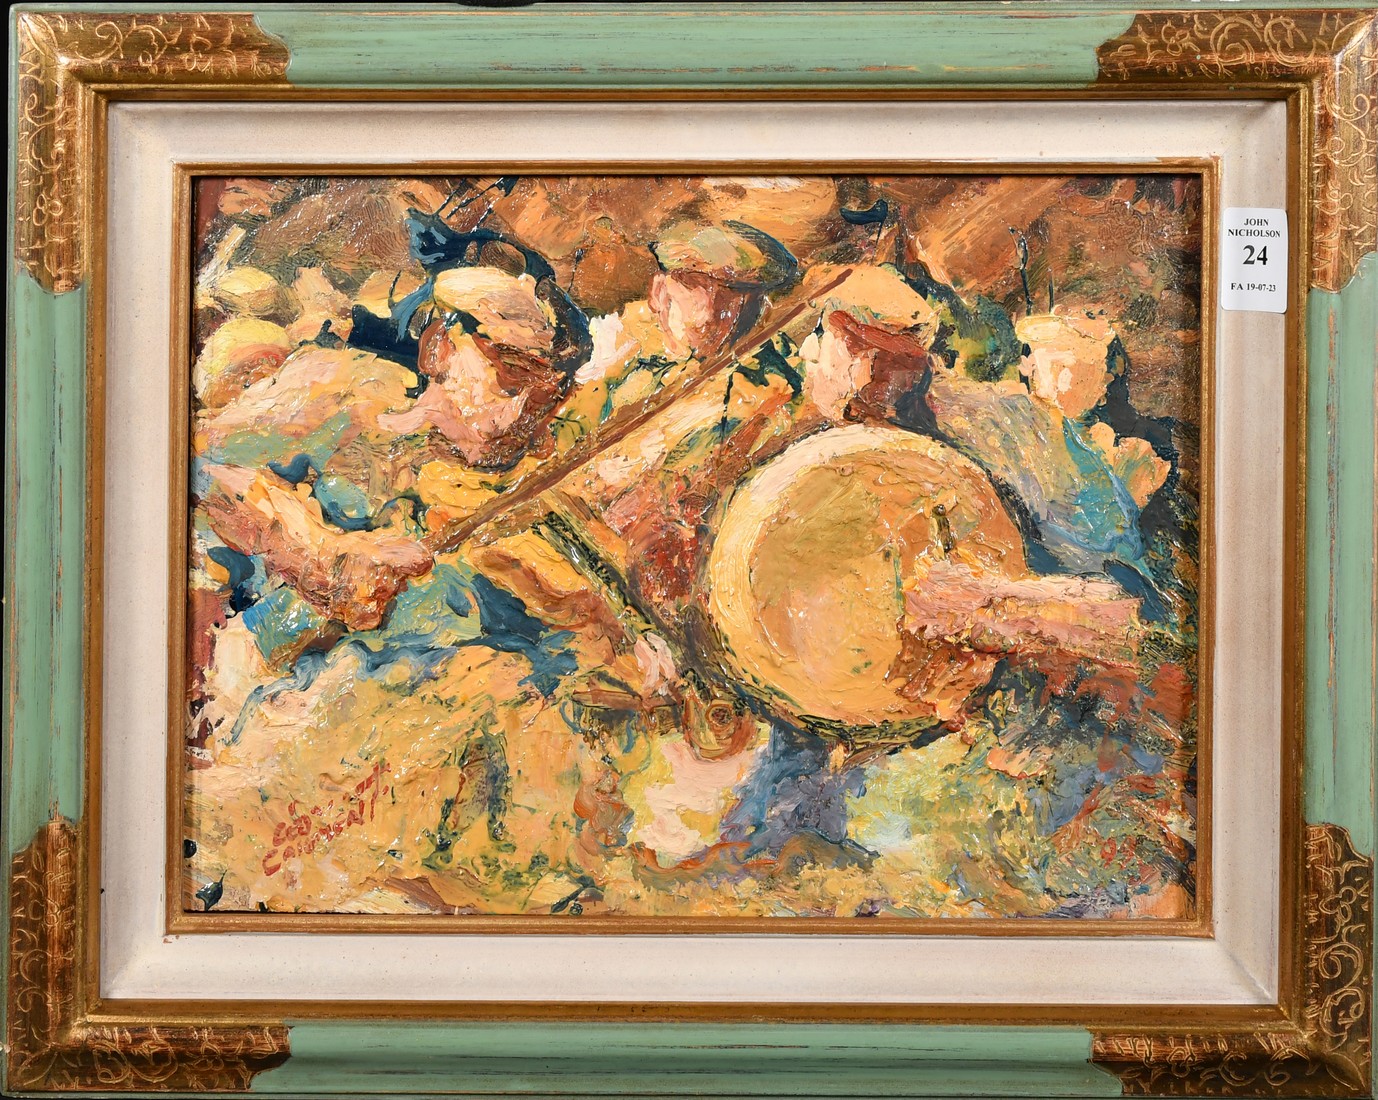 20th Century French School, villagers playing in a band, oil on board, indistinctly signed, 9.5" x - Image 2 of 4